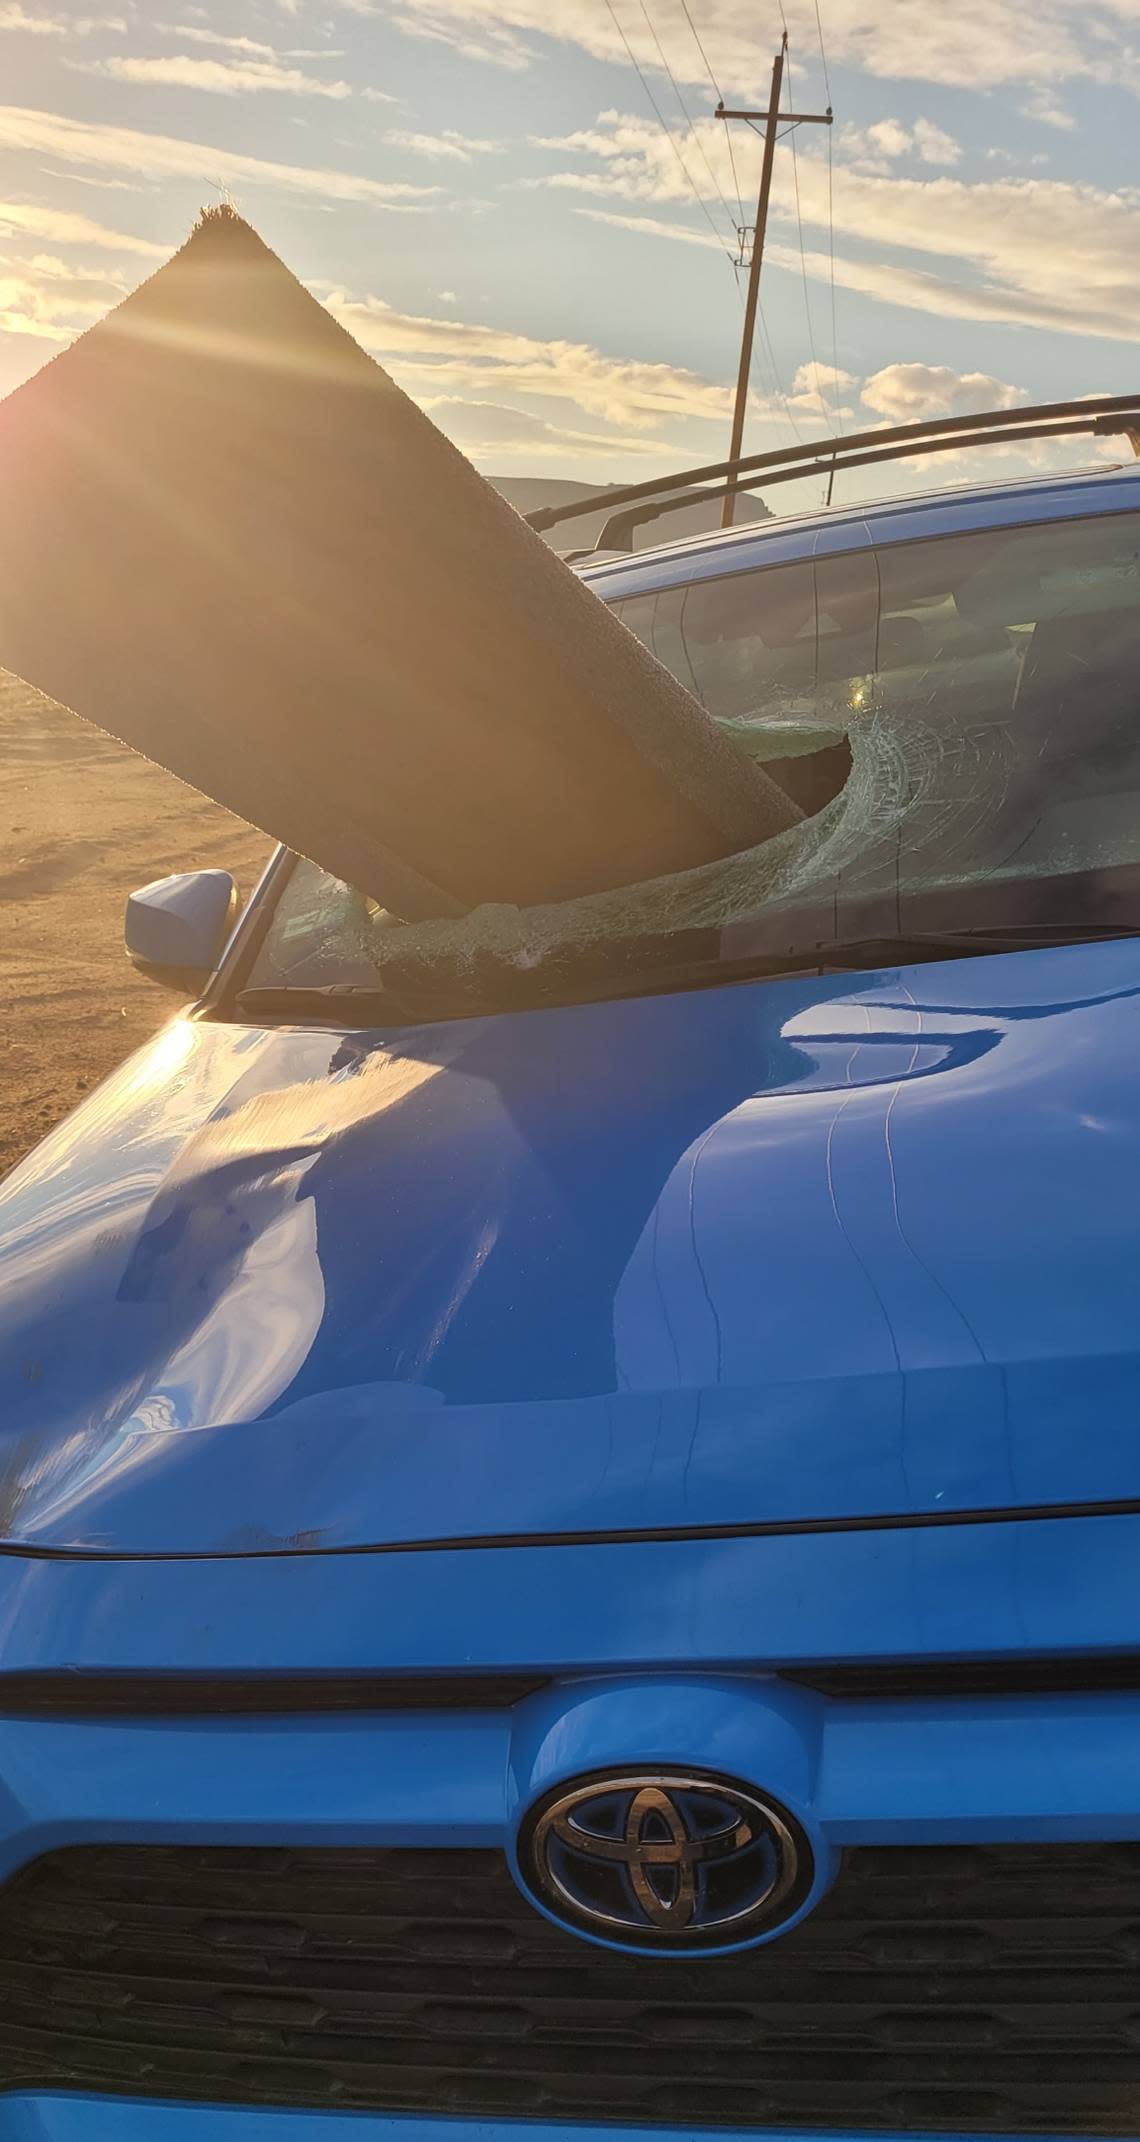 Crystal Christman shared photos of damage to her SUV cause by a piece of debris that flew out of the back of a truck while she was driving on Highway 145 near Madera.